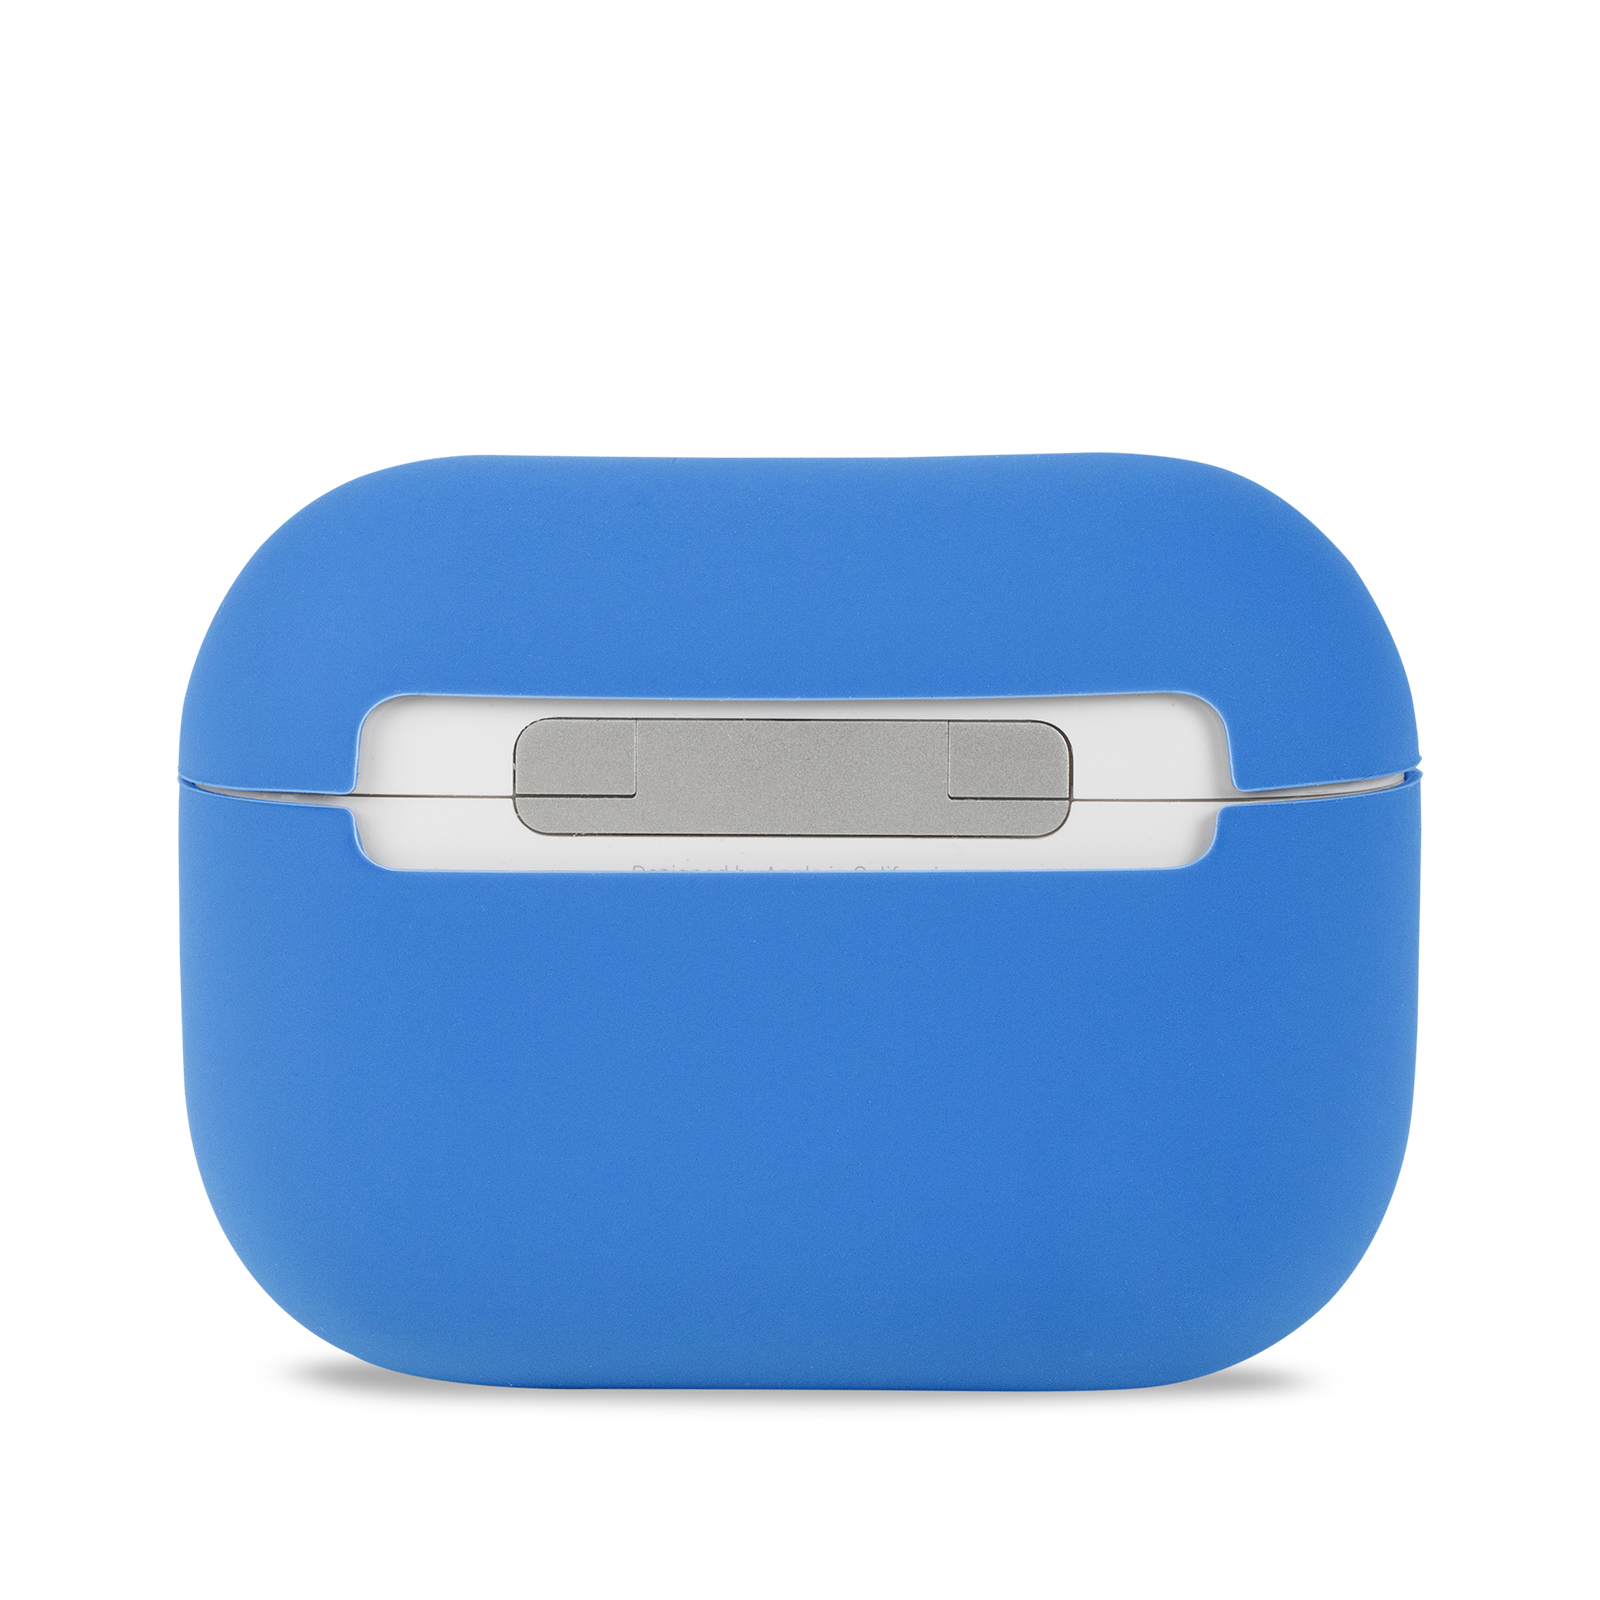  Kaлъф Holdit за AirPods Pro 1, 2, Silicone Case, Sky Blue